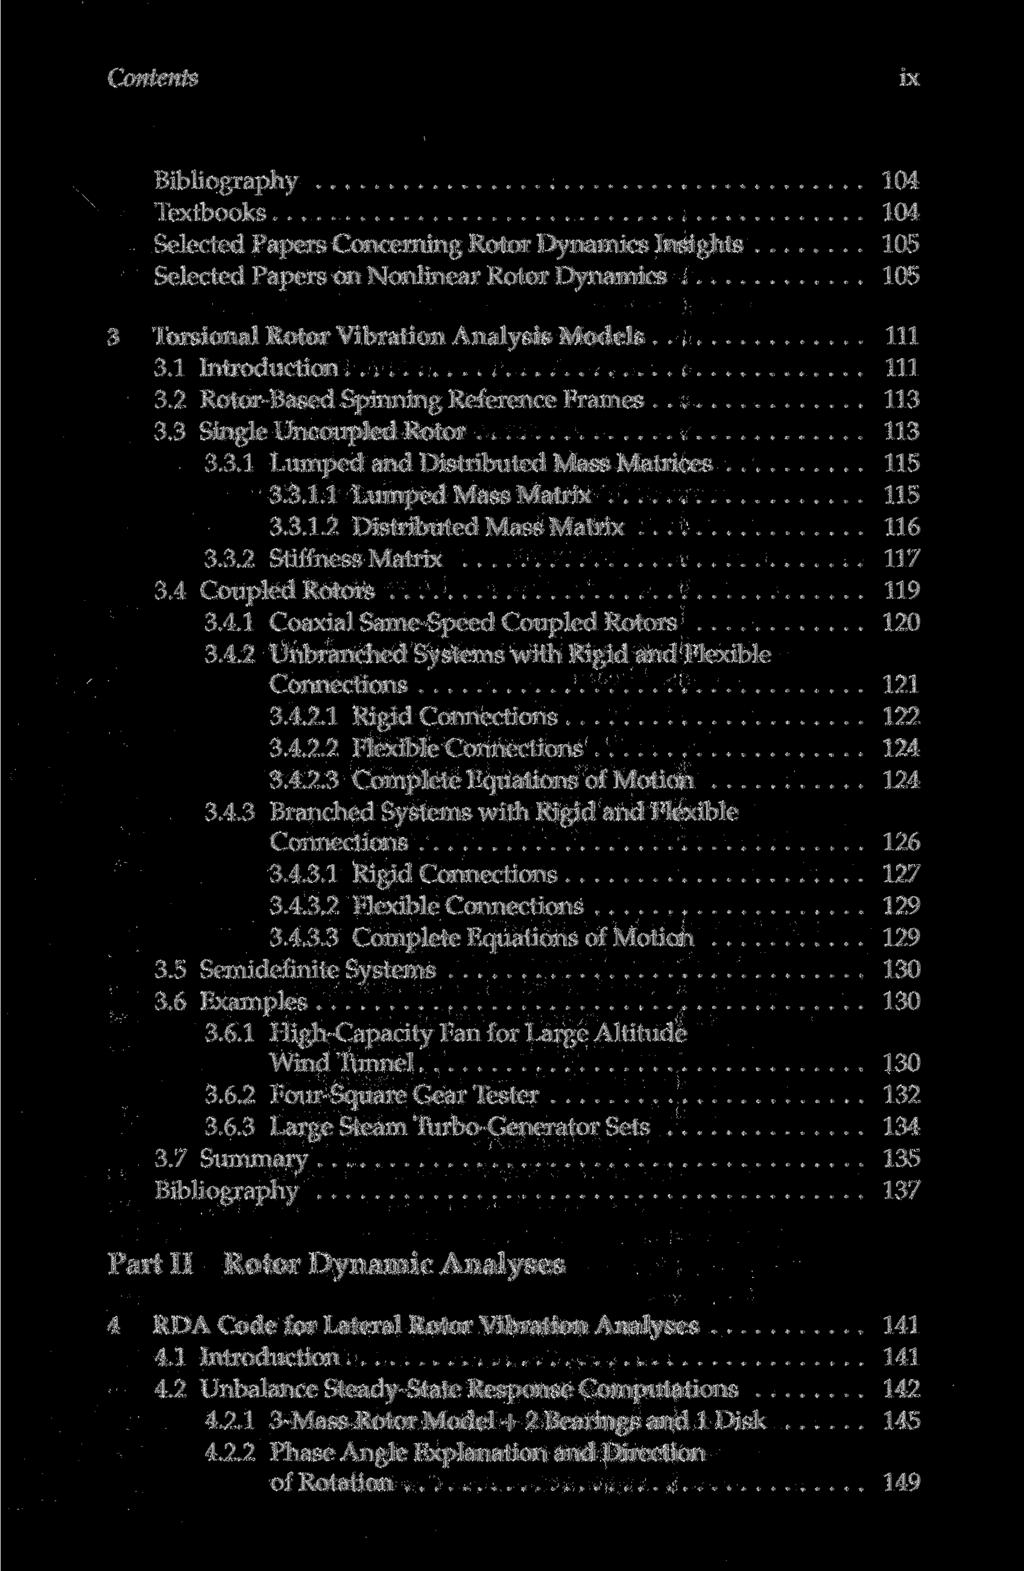 Contents ix Bibliography 104 Textbooks 104 Selected Papers Concerning Rotor Dynamics Insights 105 Selected Papers on Nonlinear Rotor Dynamics 105 3 Torsional Rotor Vibration Analysis Models Ill 3.